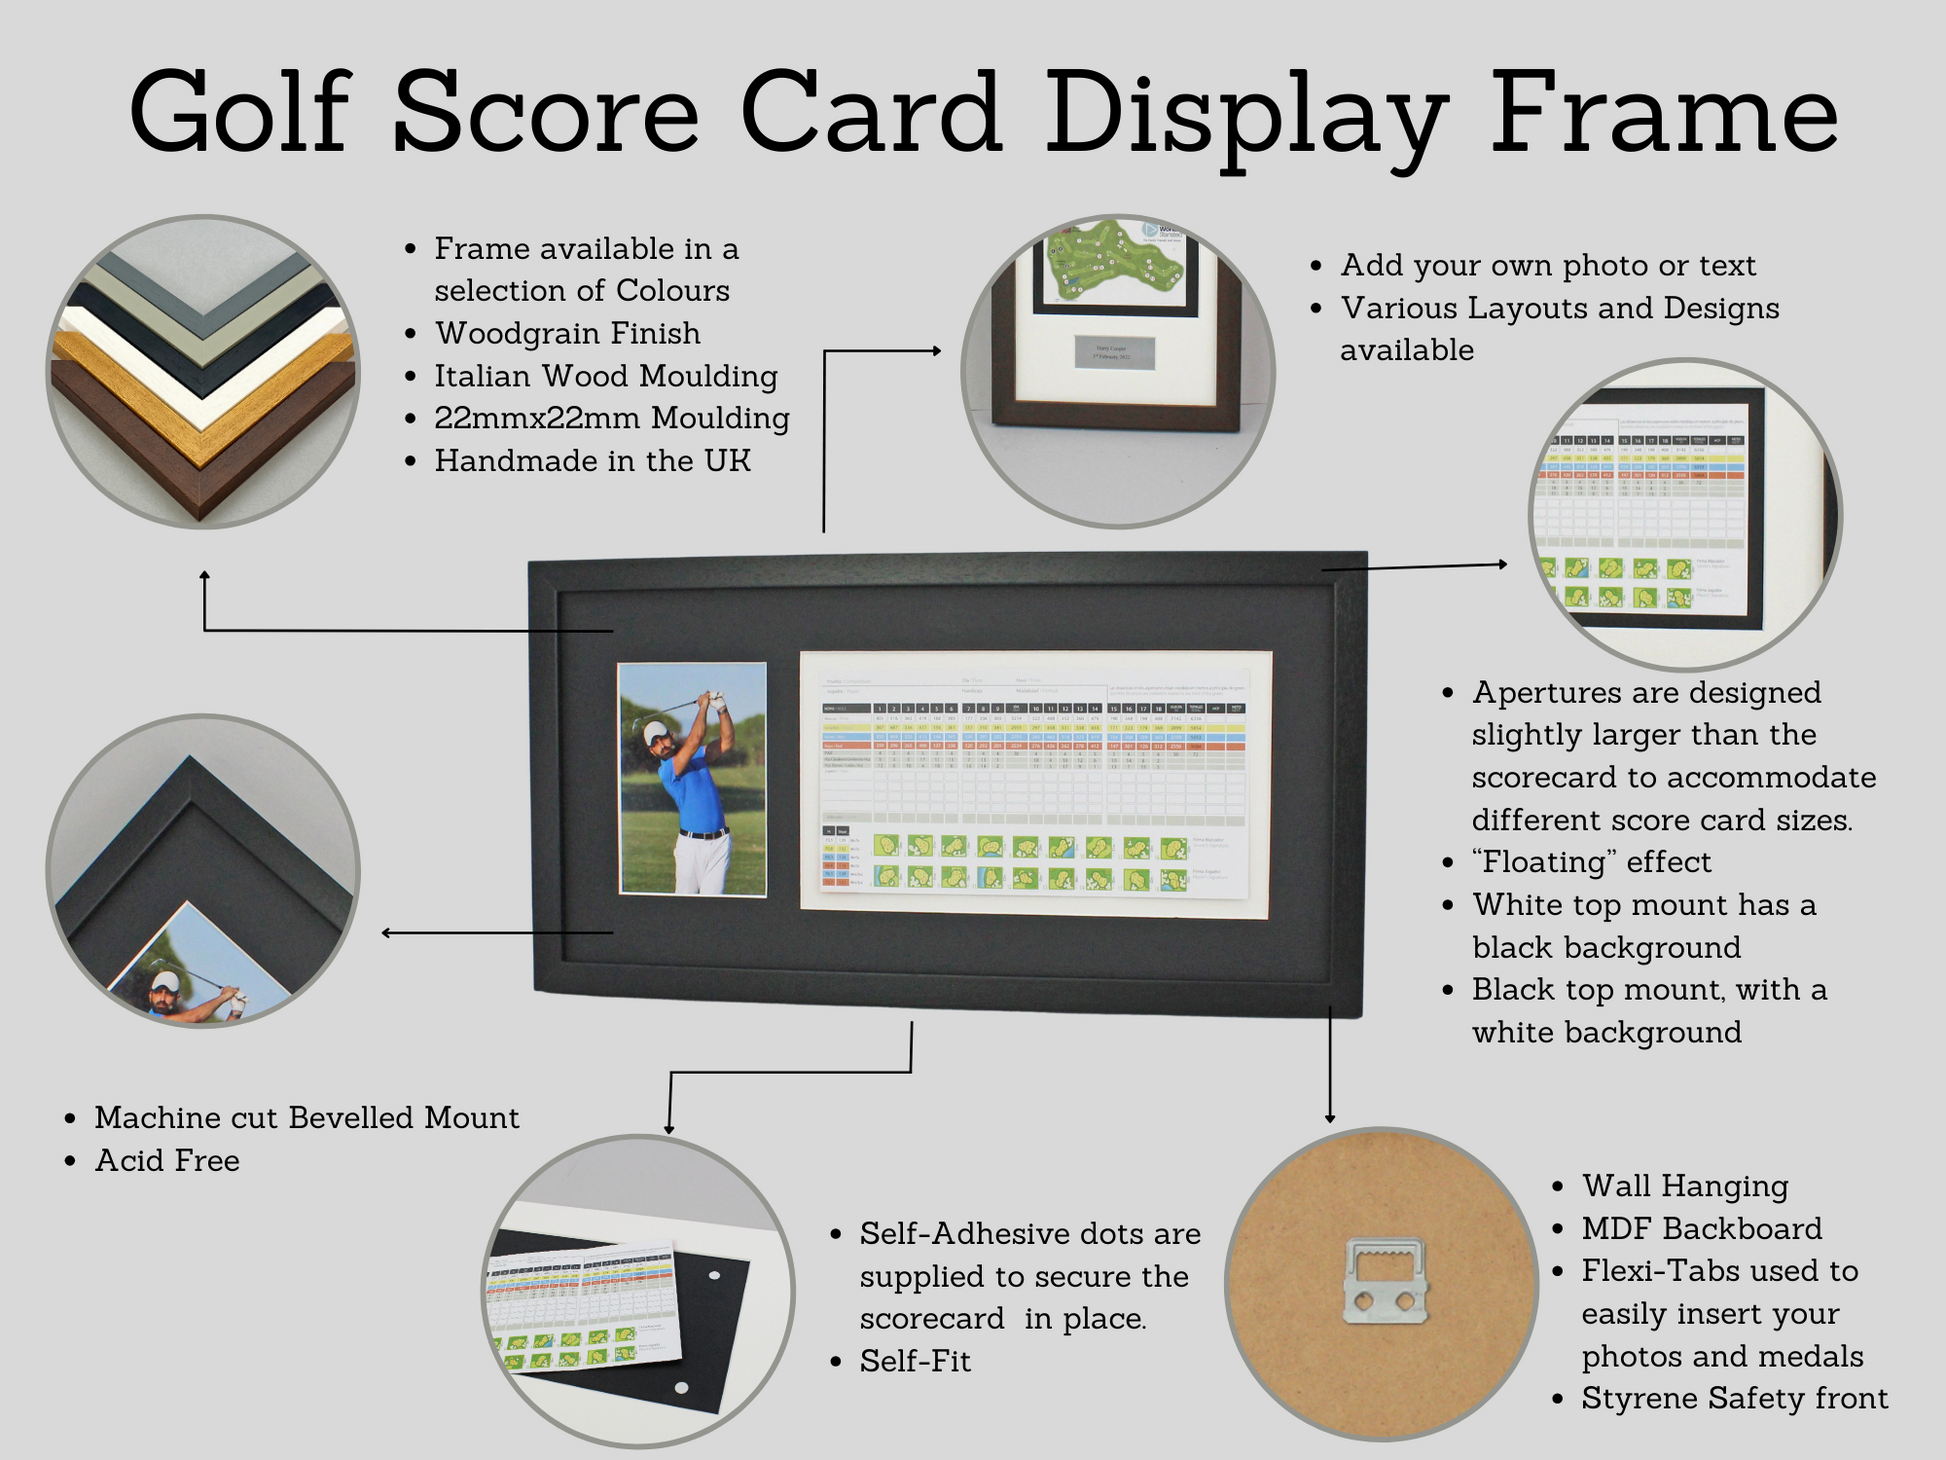 Personalised Golf Score Card Display Frame. 20x40cm Frame | Score Card sizes can vary - Check your size before purchase. - PhotoFramesandMore - Wooden Picture Frames